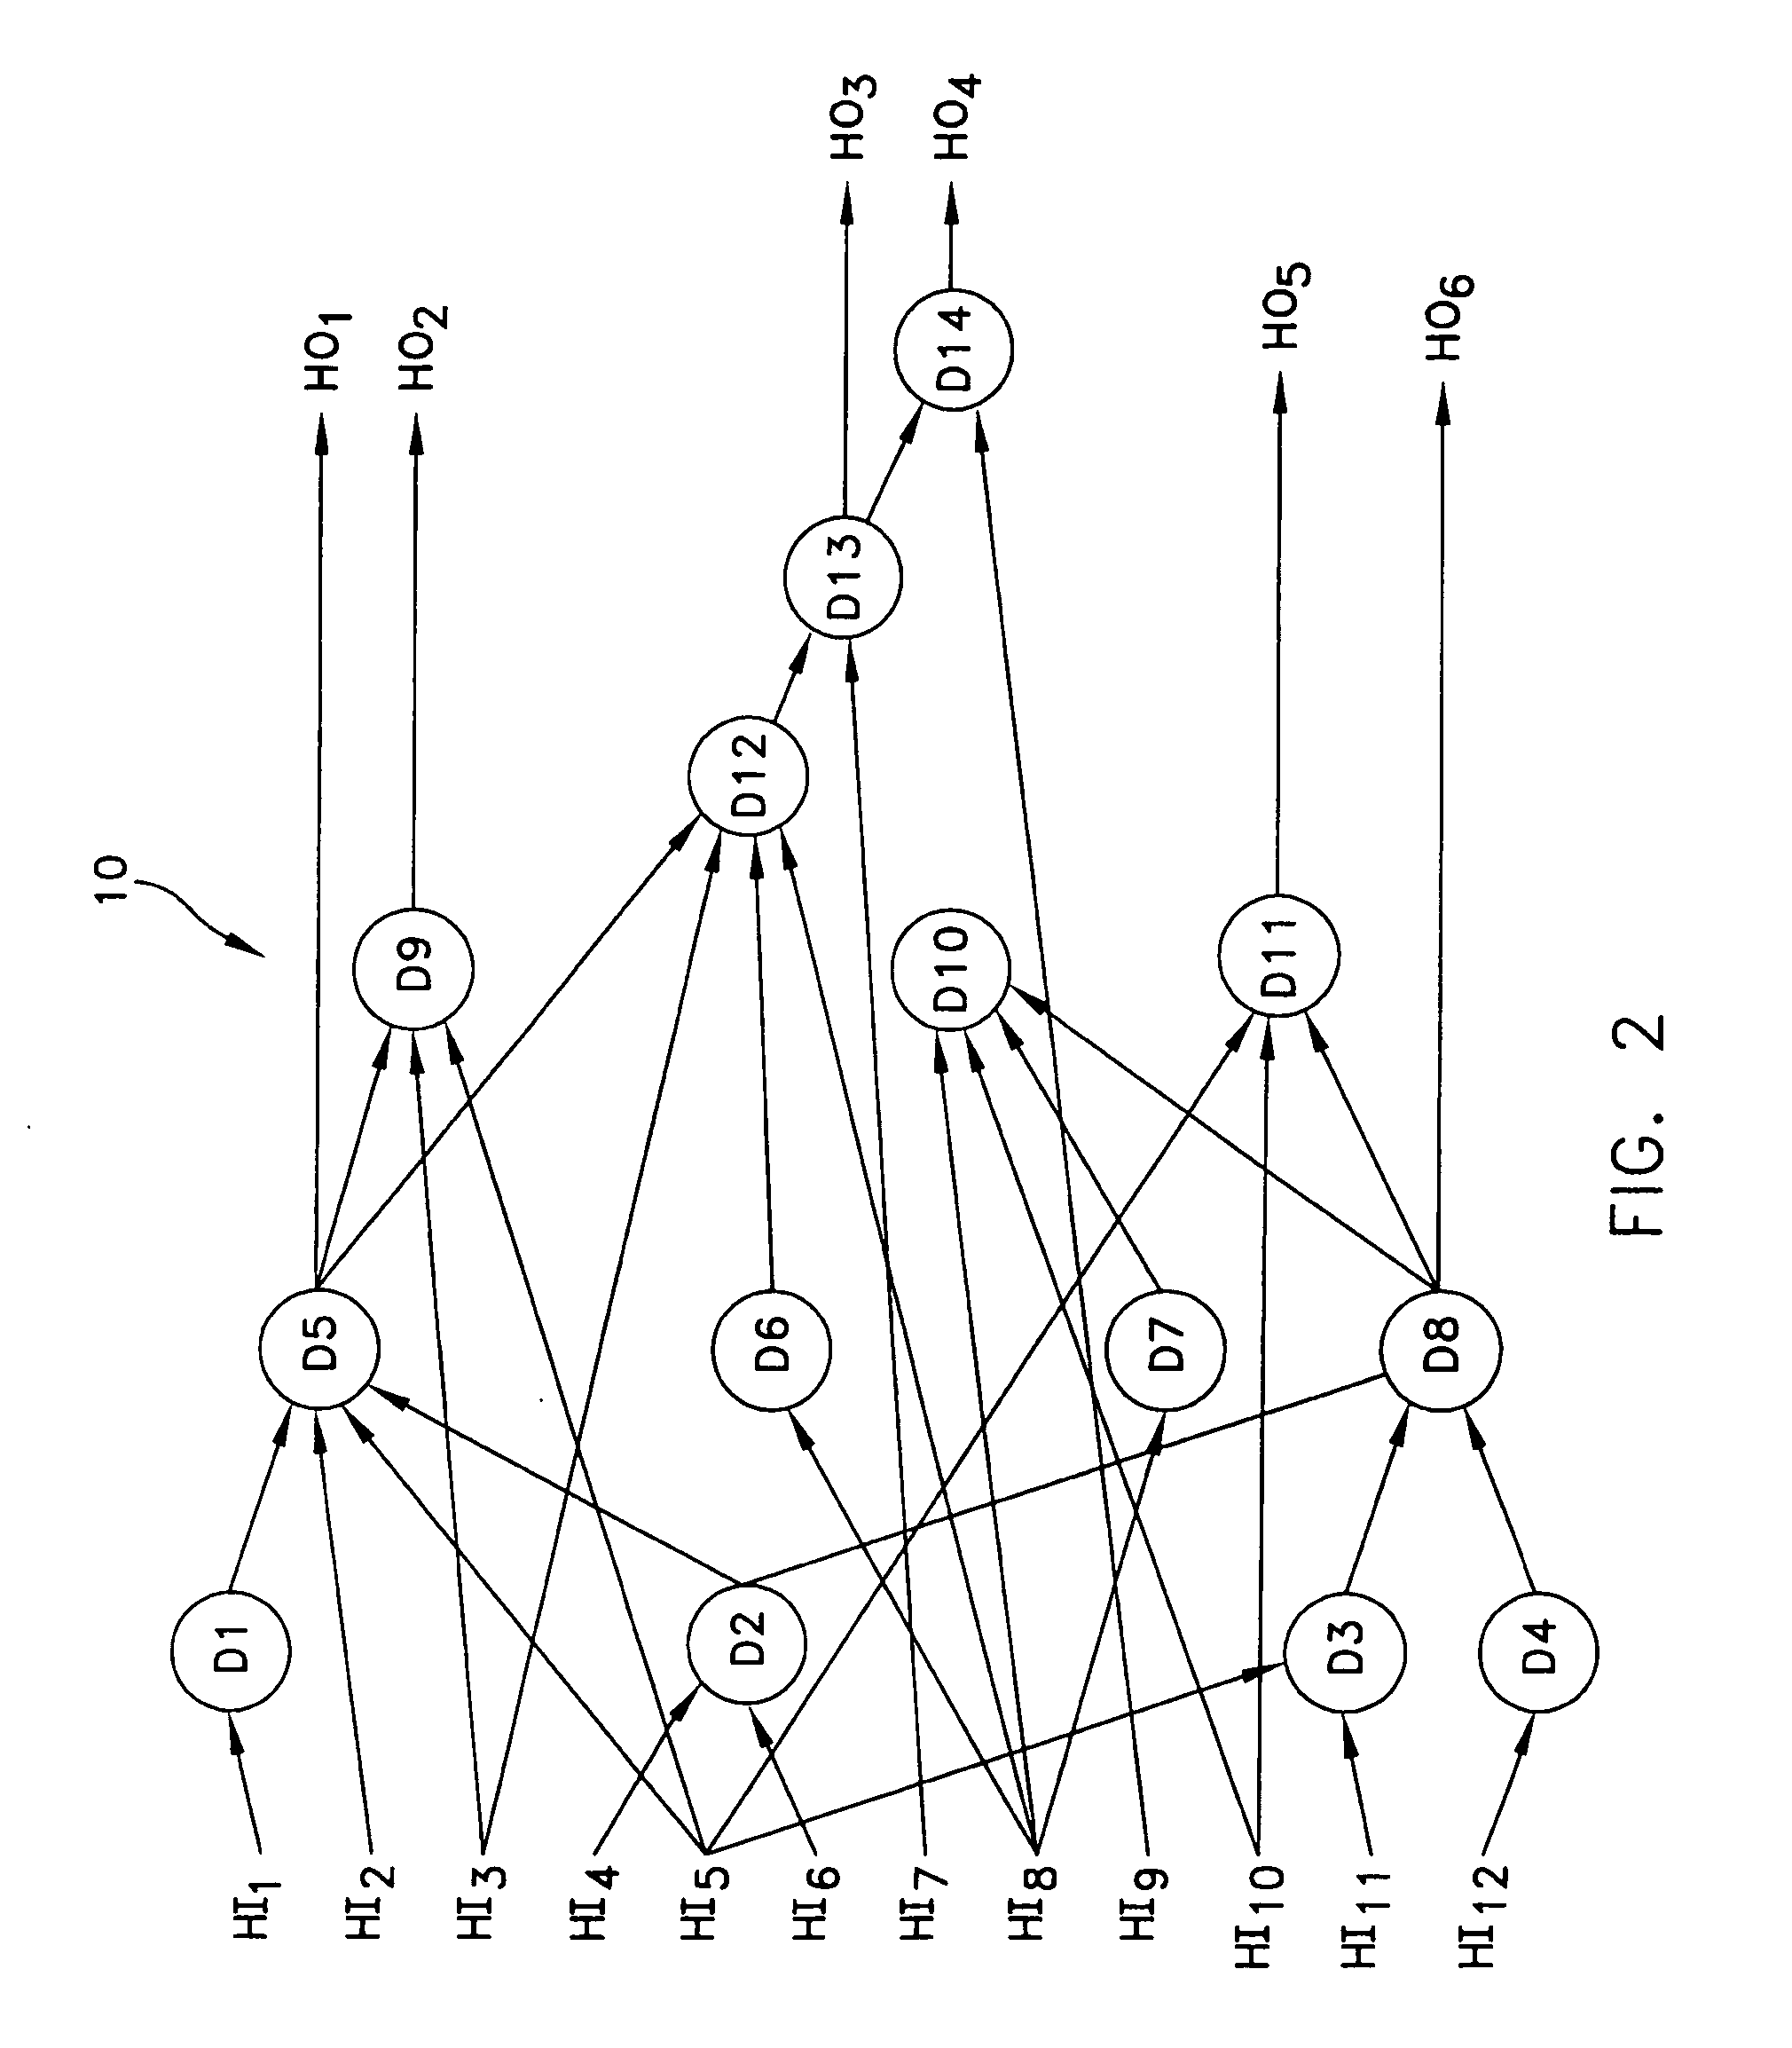 Recurrent distribution network with input boundary limiters